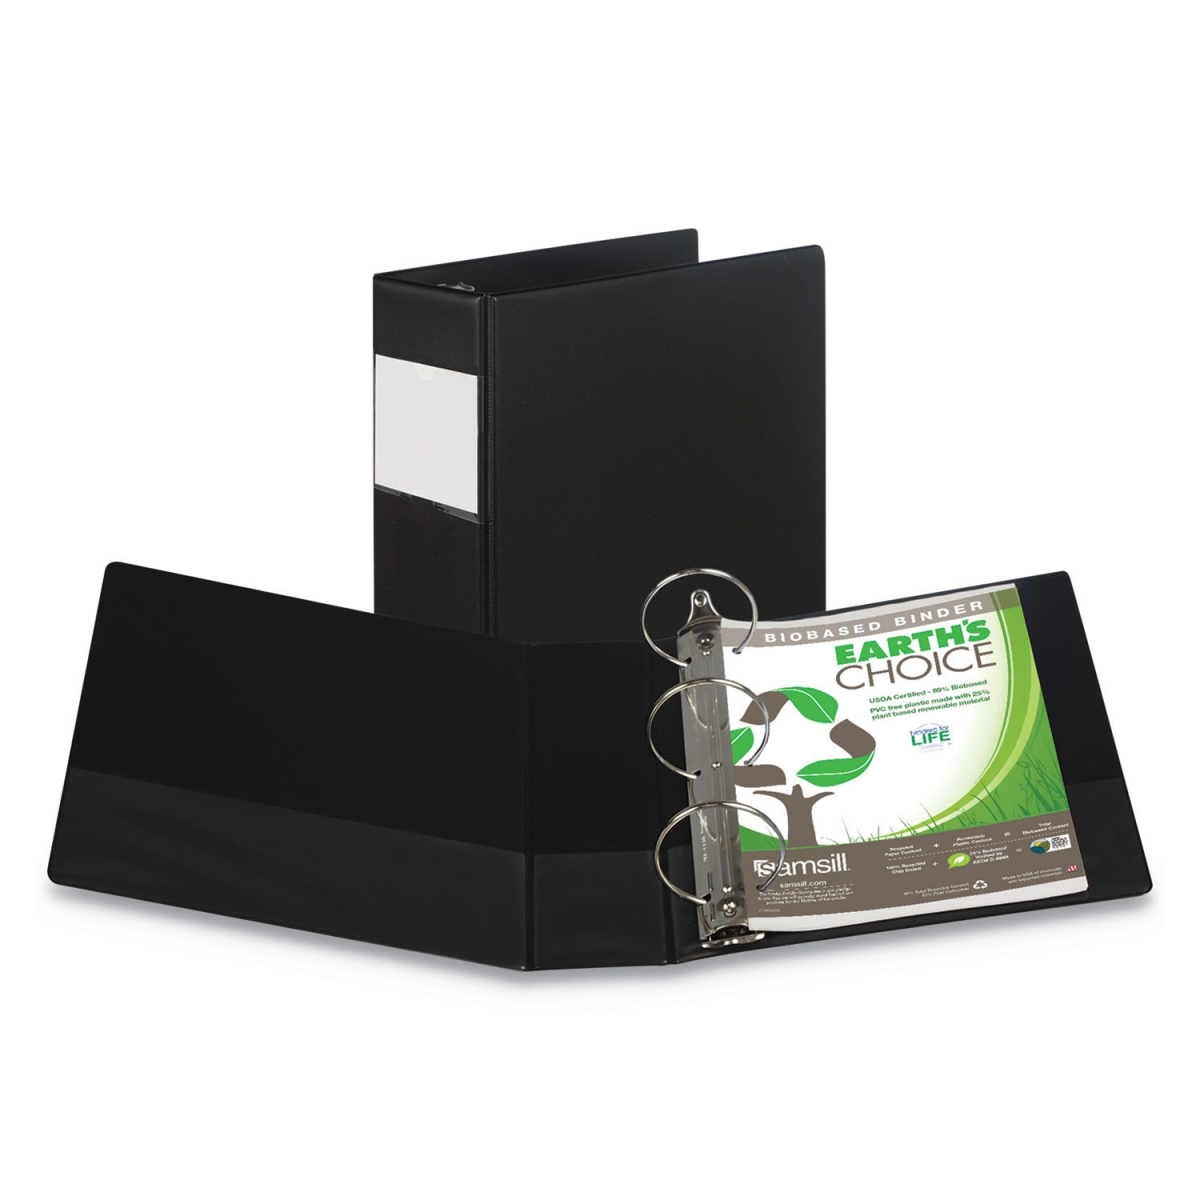 Sam14880 3 In. Earths Choice Round Ring Reference Binder, Black - 11 X 8.5 In.